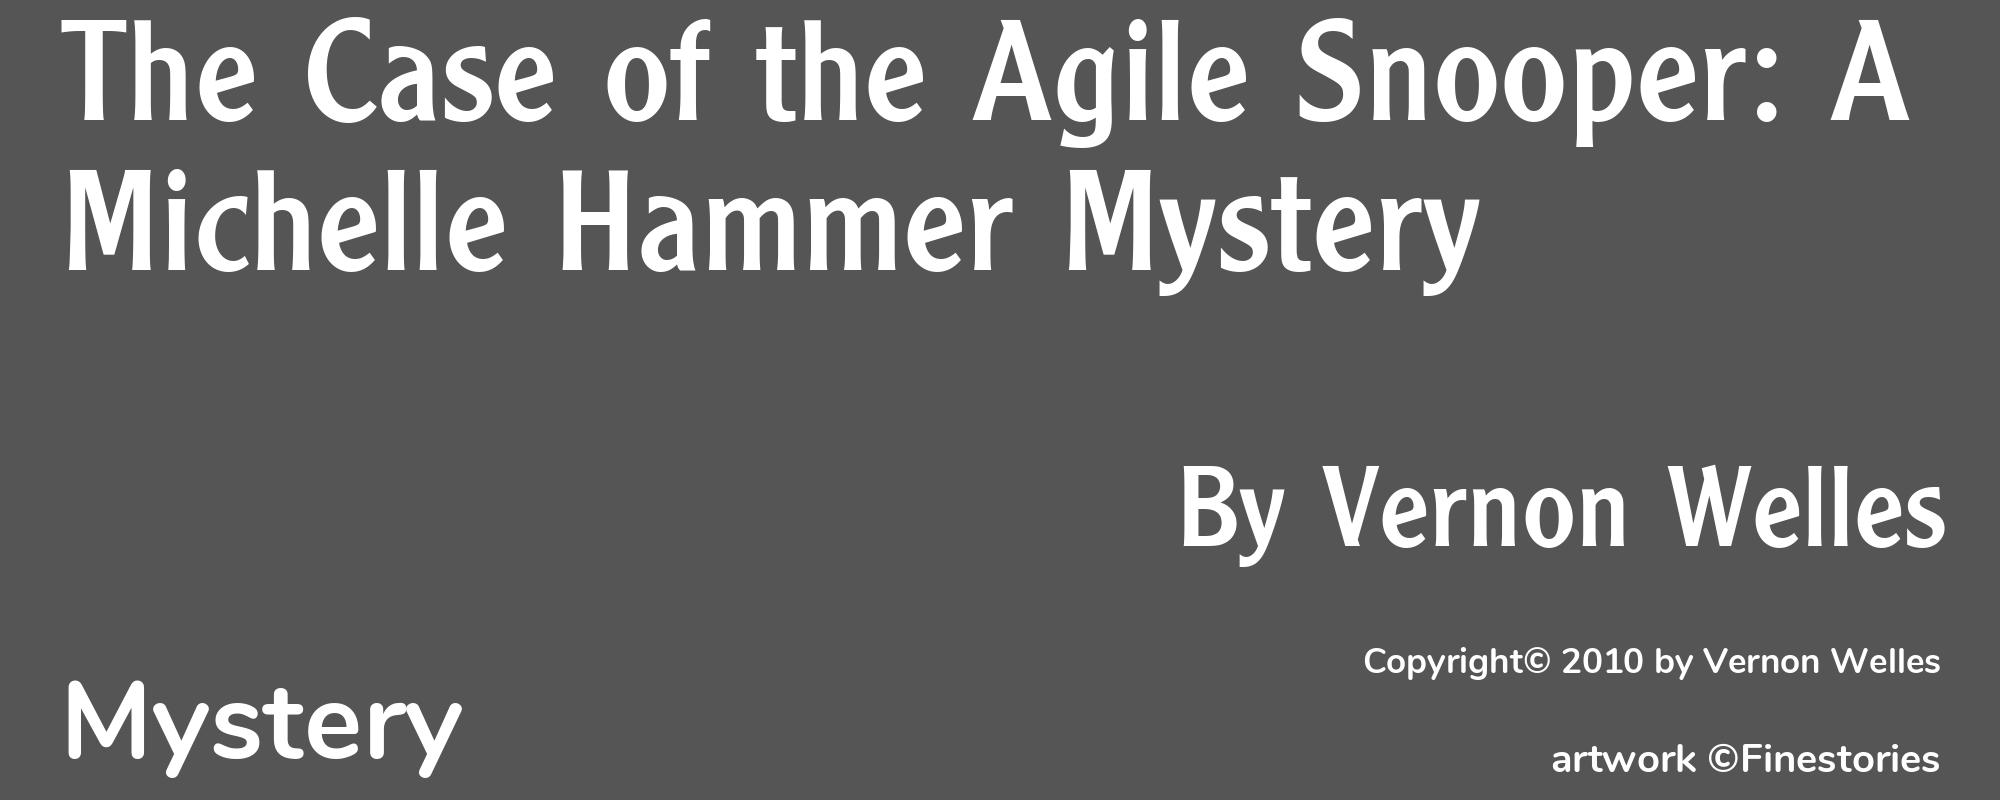 The Case of the Agile Snooper: A Michelle Hammer Mystery - Cover